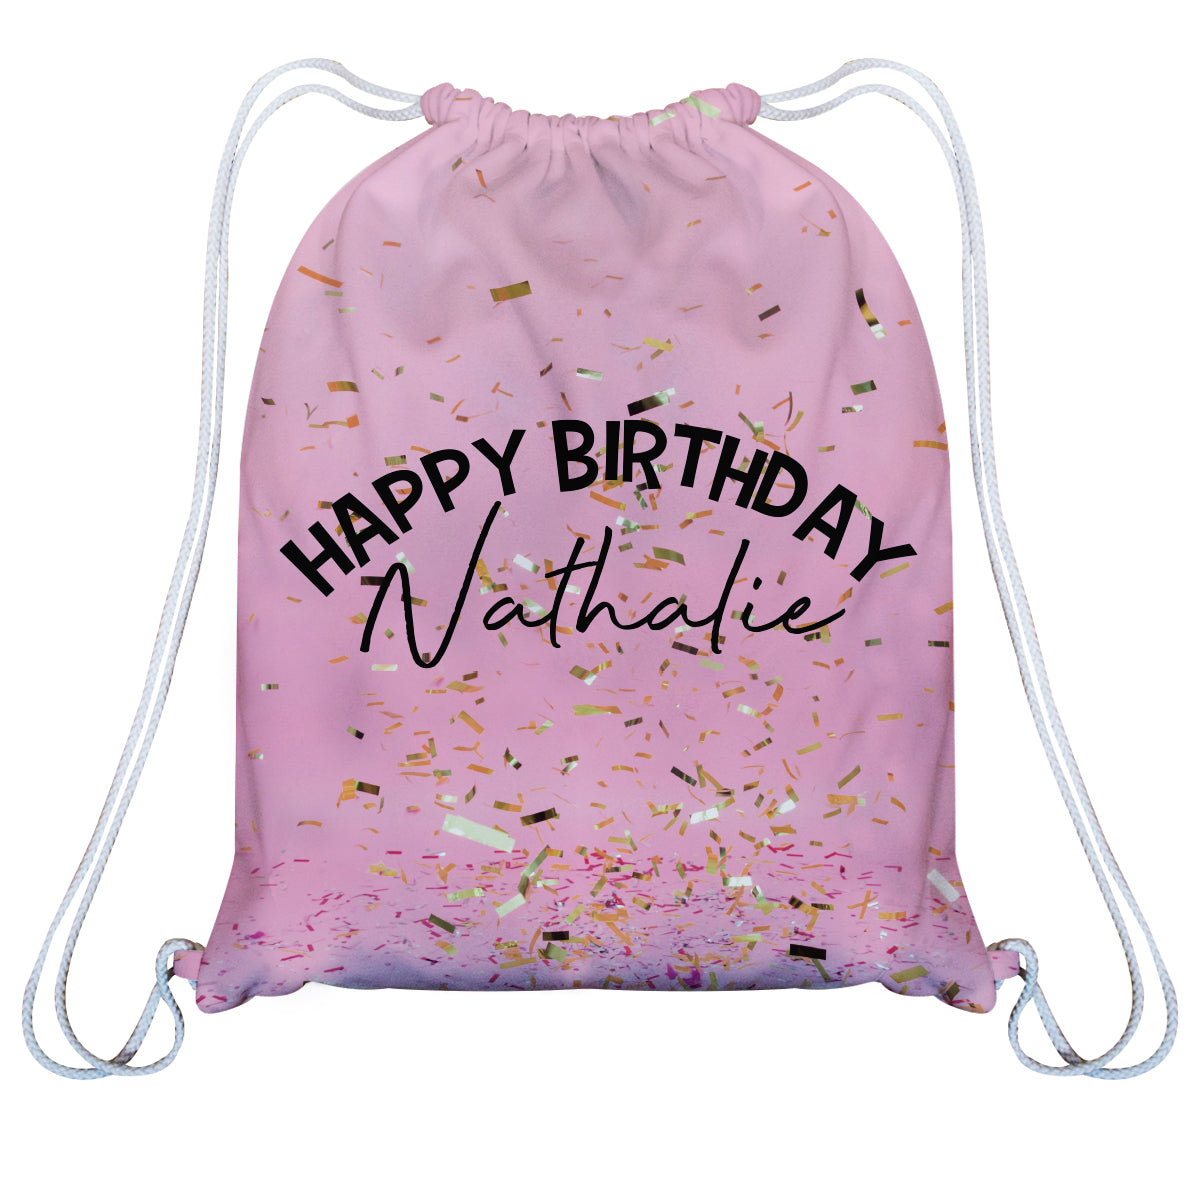 Happy Birthday Personalized Name Pink Bag 14 x 19""